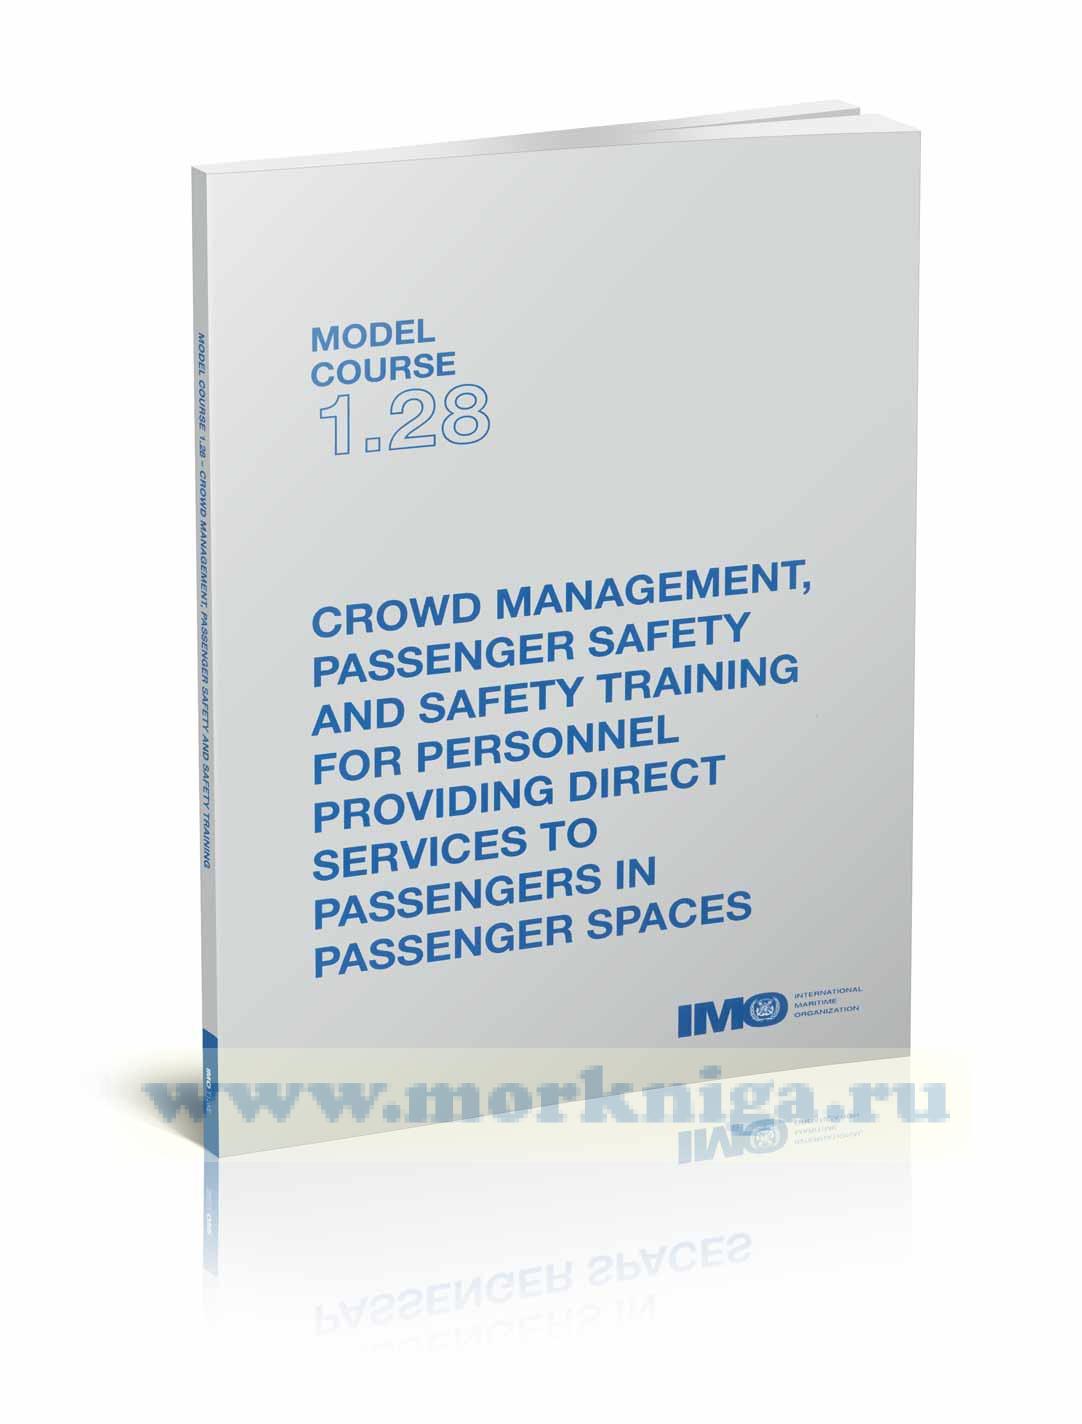 Crowd management, passenger safety and safety training for personnel providing direct services to passengers in passenger spaces. Model course 1.28